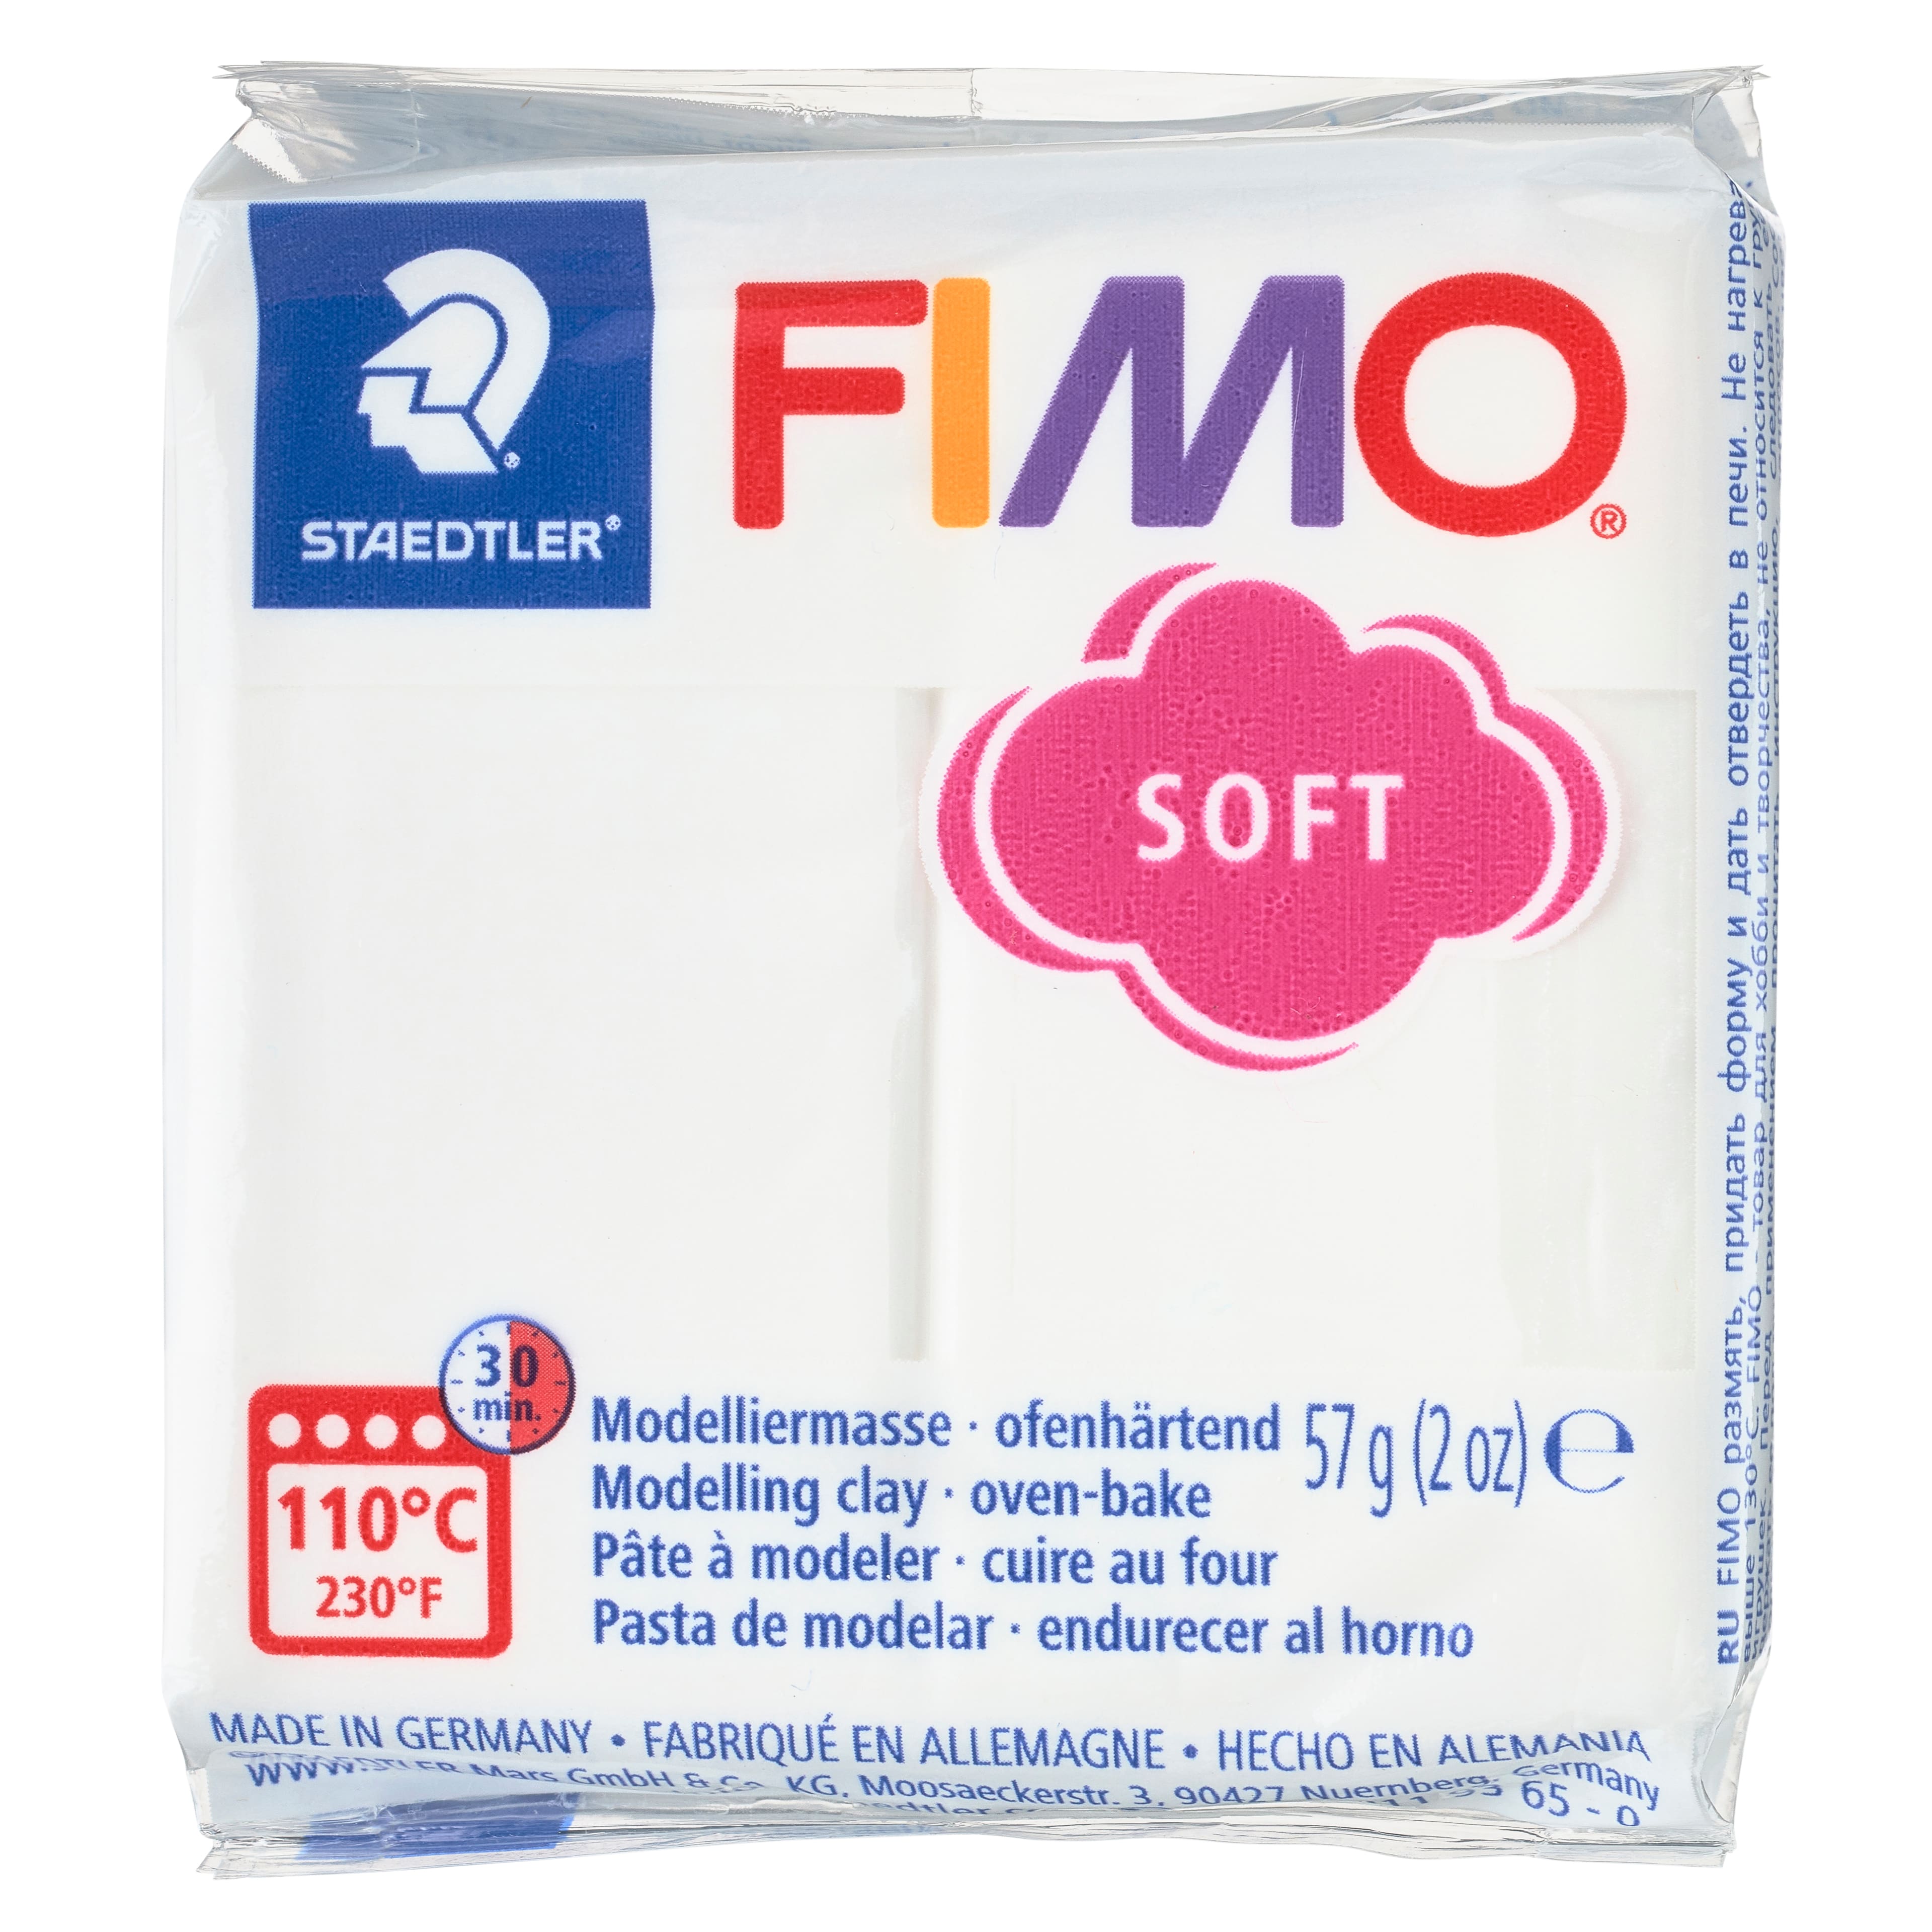 FIMO Polymer Clay Modelling Clay Soft White 3 Pack Arts and Crafts DIY  Oven-bake Clay Moulding Sculpting Craft Supplies 